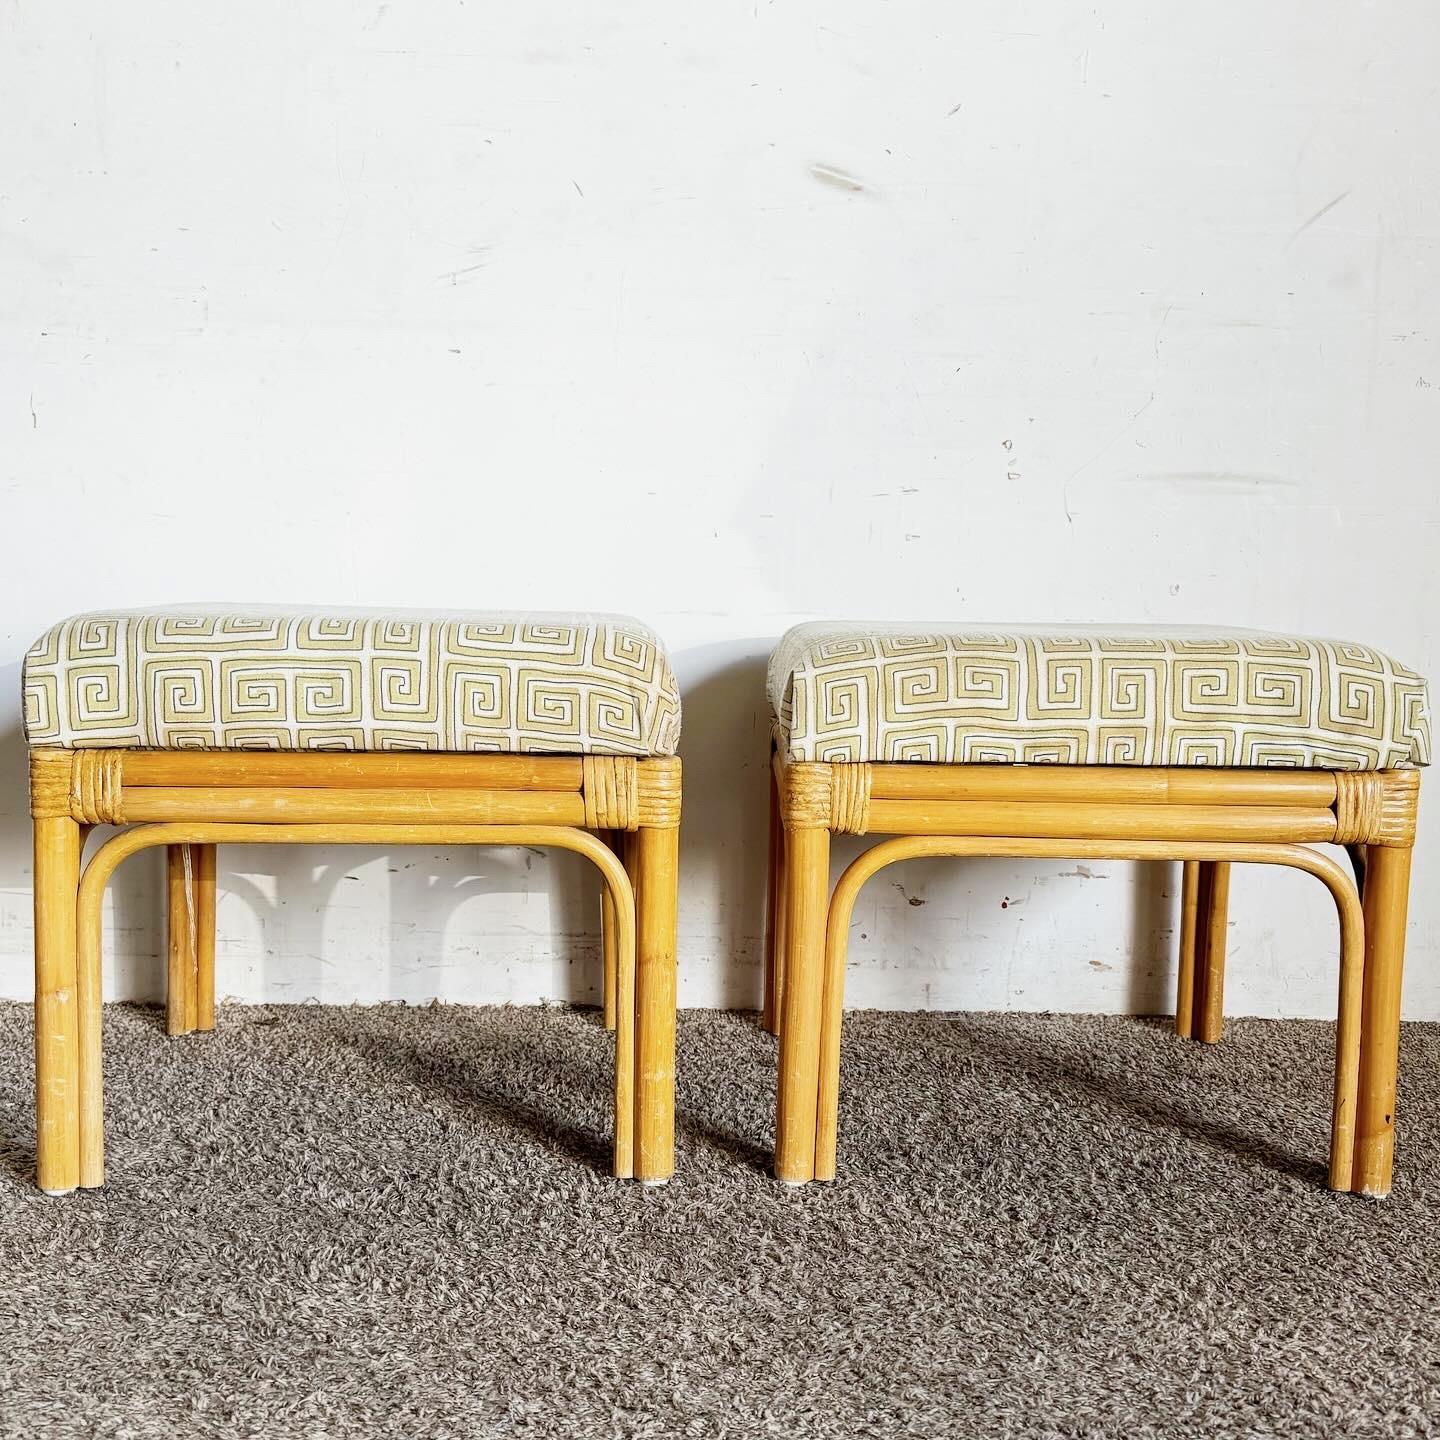 Late 20th Century Boho Chic Bamboo Rattan Square Top Ottomans/Low Stools - a Pair For Sale